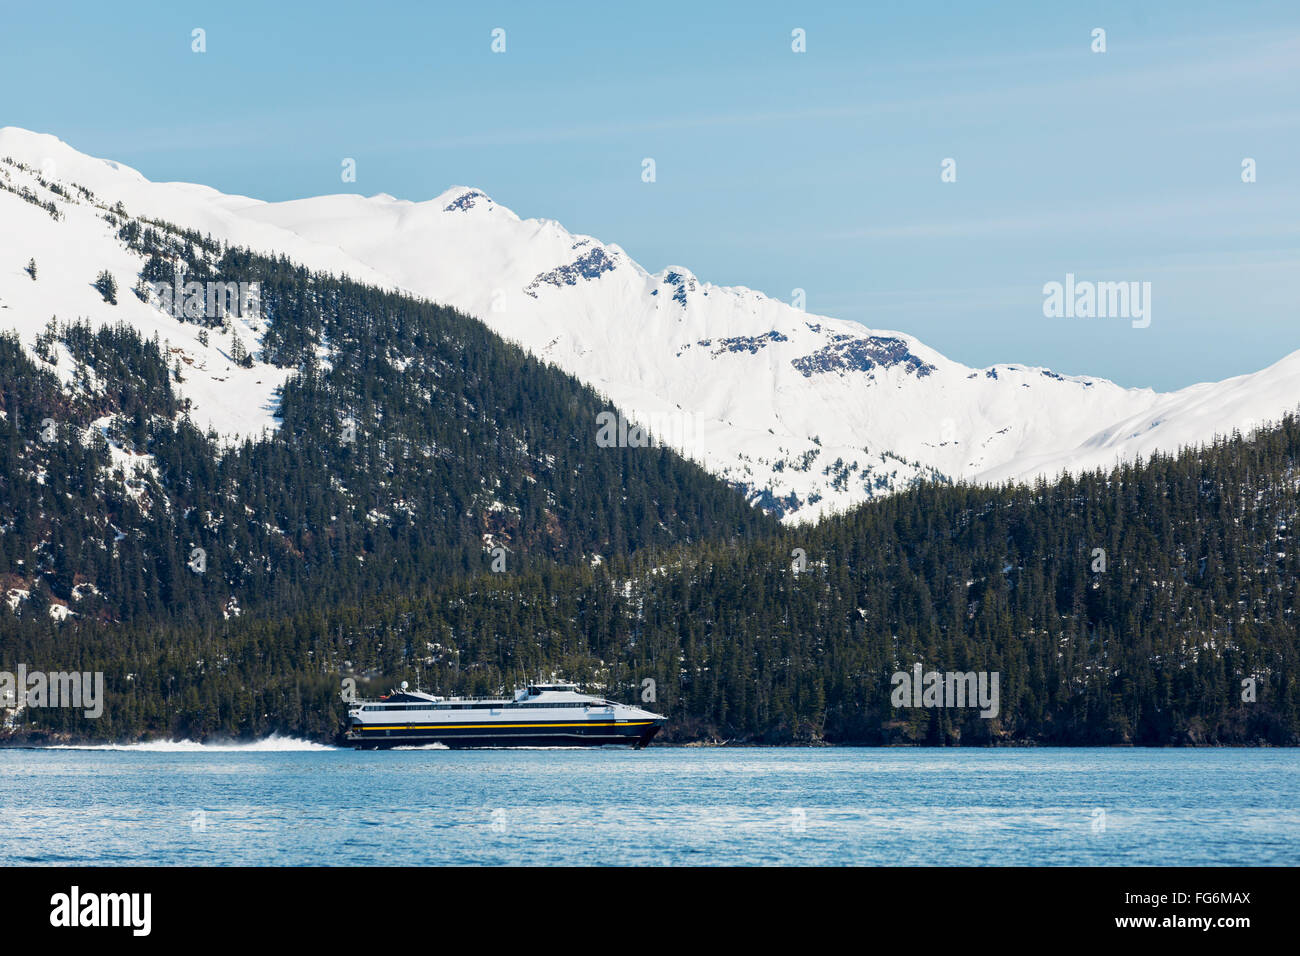 The Fast Ferry Chenega Of The Alaska Marine Highway System Motors Out Of The Passage Canal To Valdez, Prince William Sound, Whittier, Southcentral ... Stock Photo